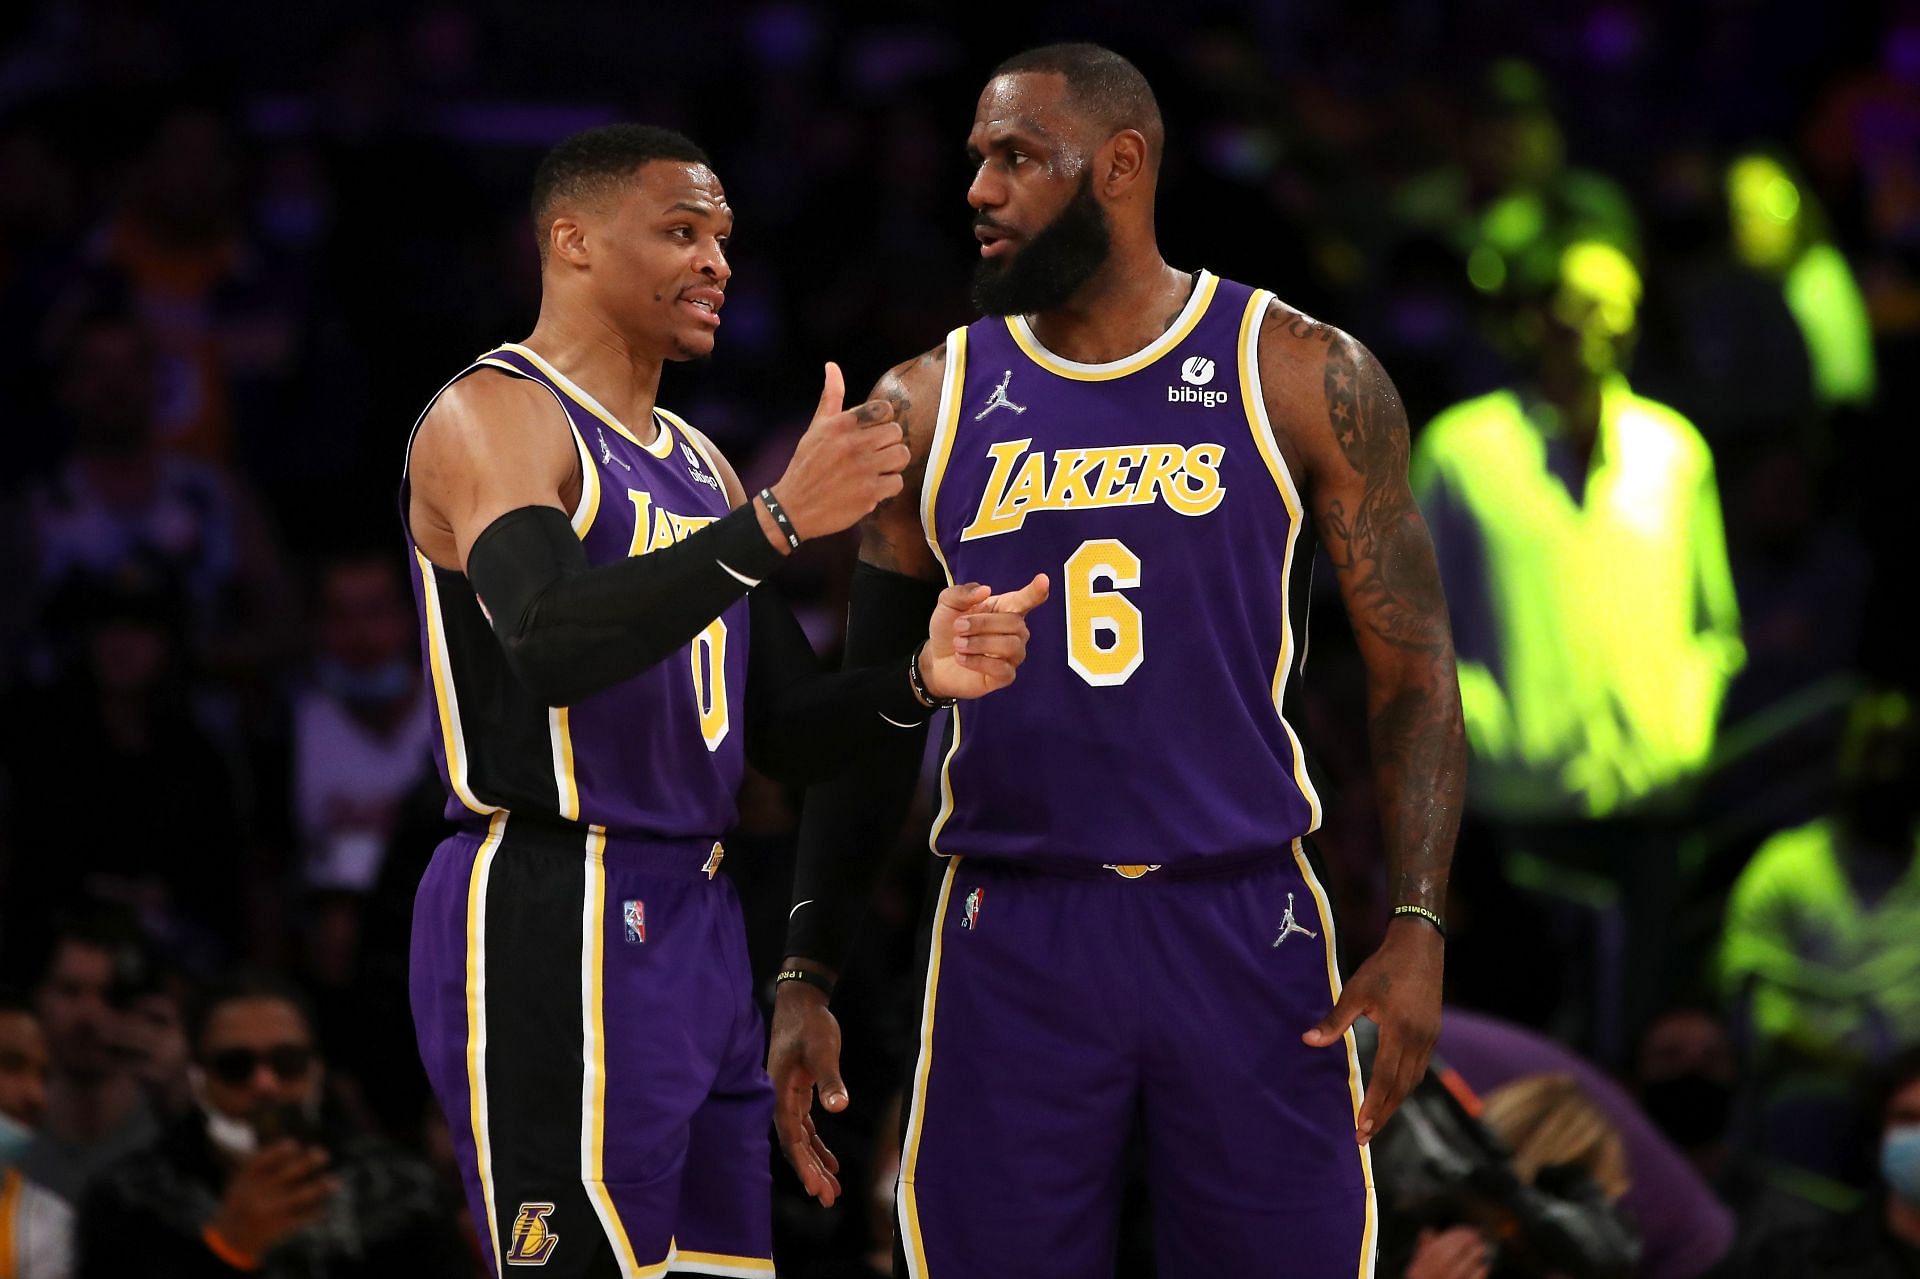 Russell Westbrook and LeBron James are not a great fit. [Image Credit: Getty Images]